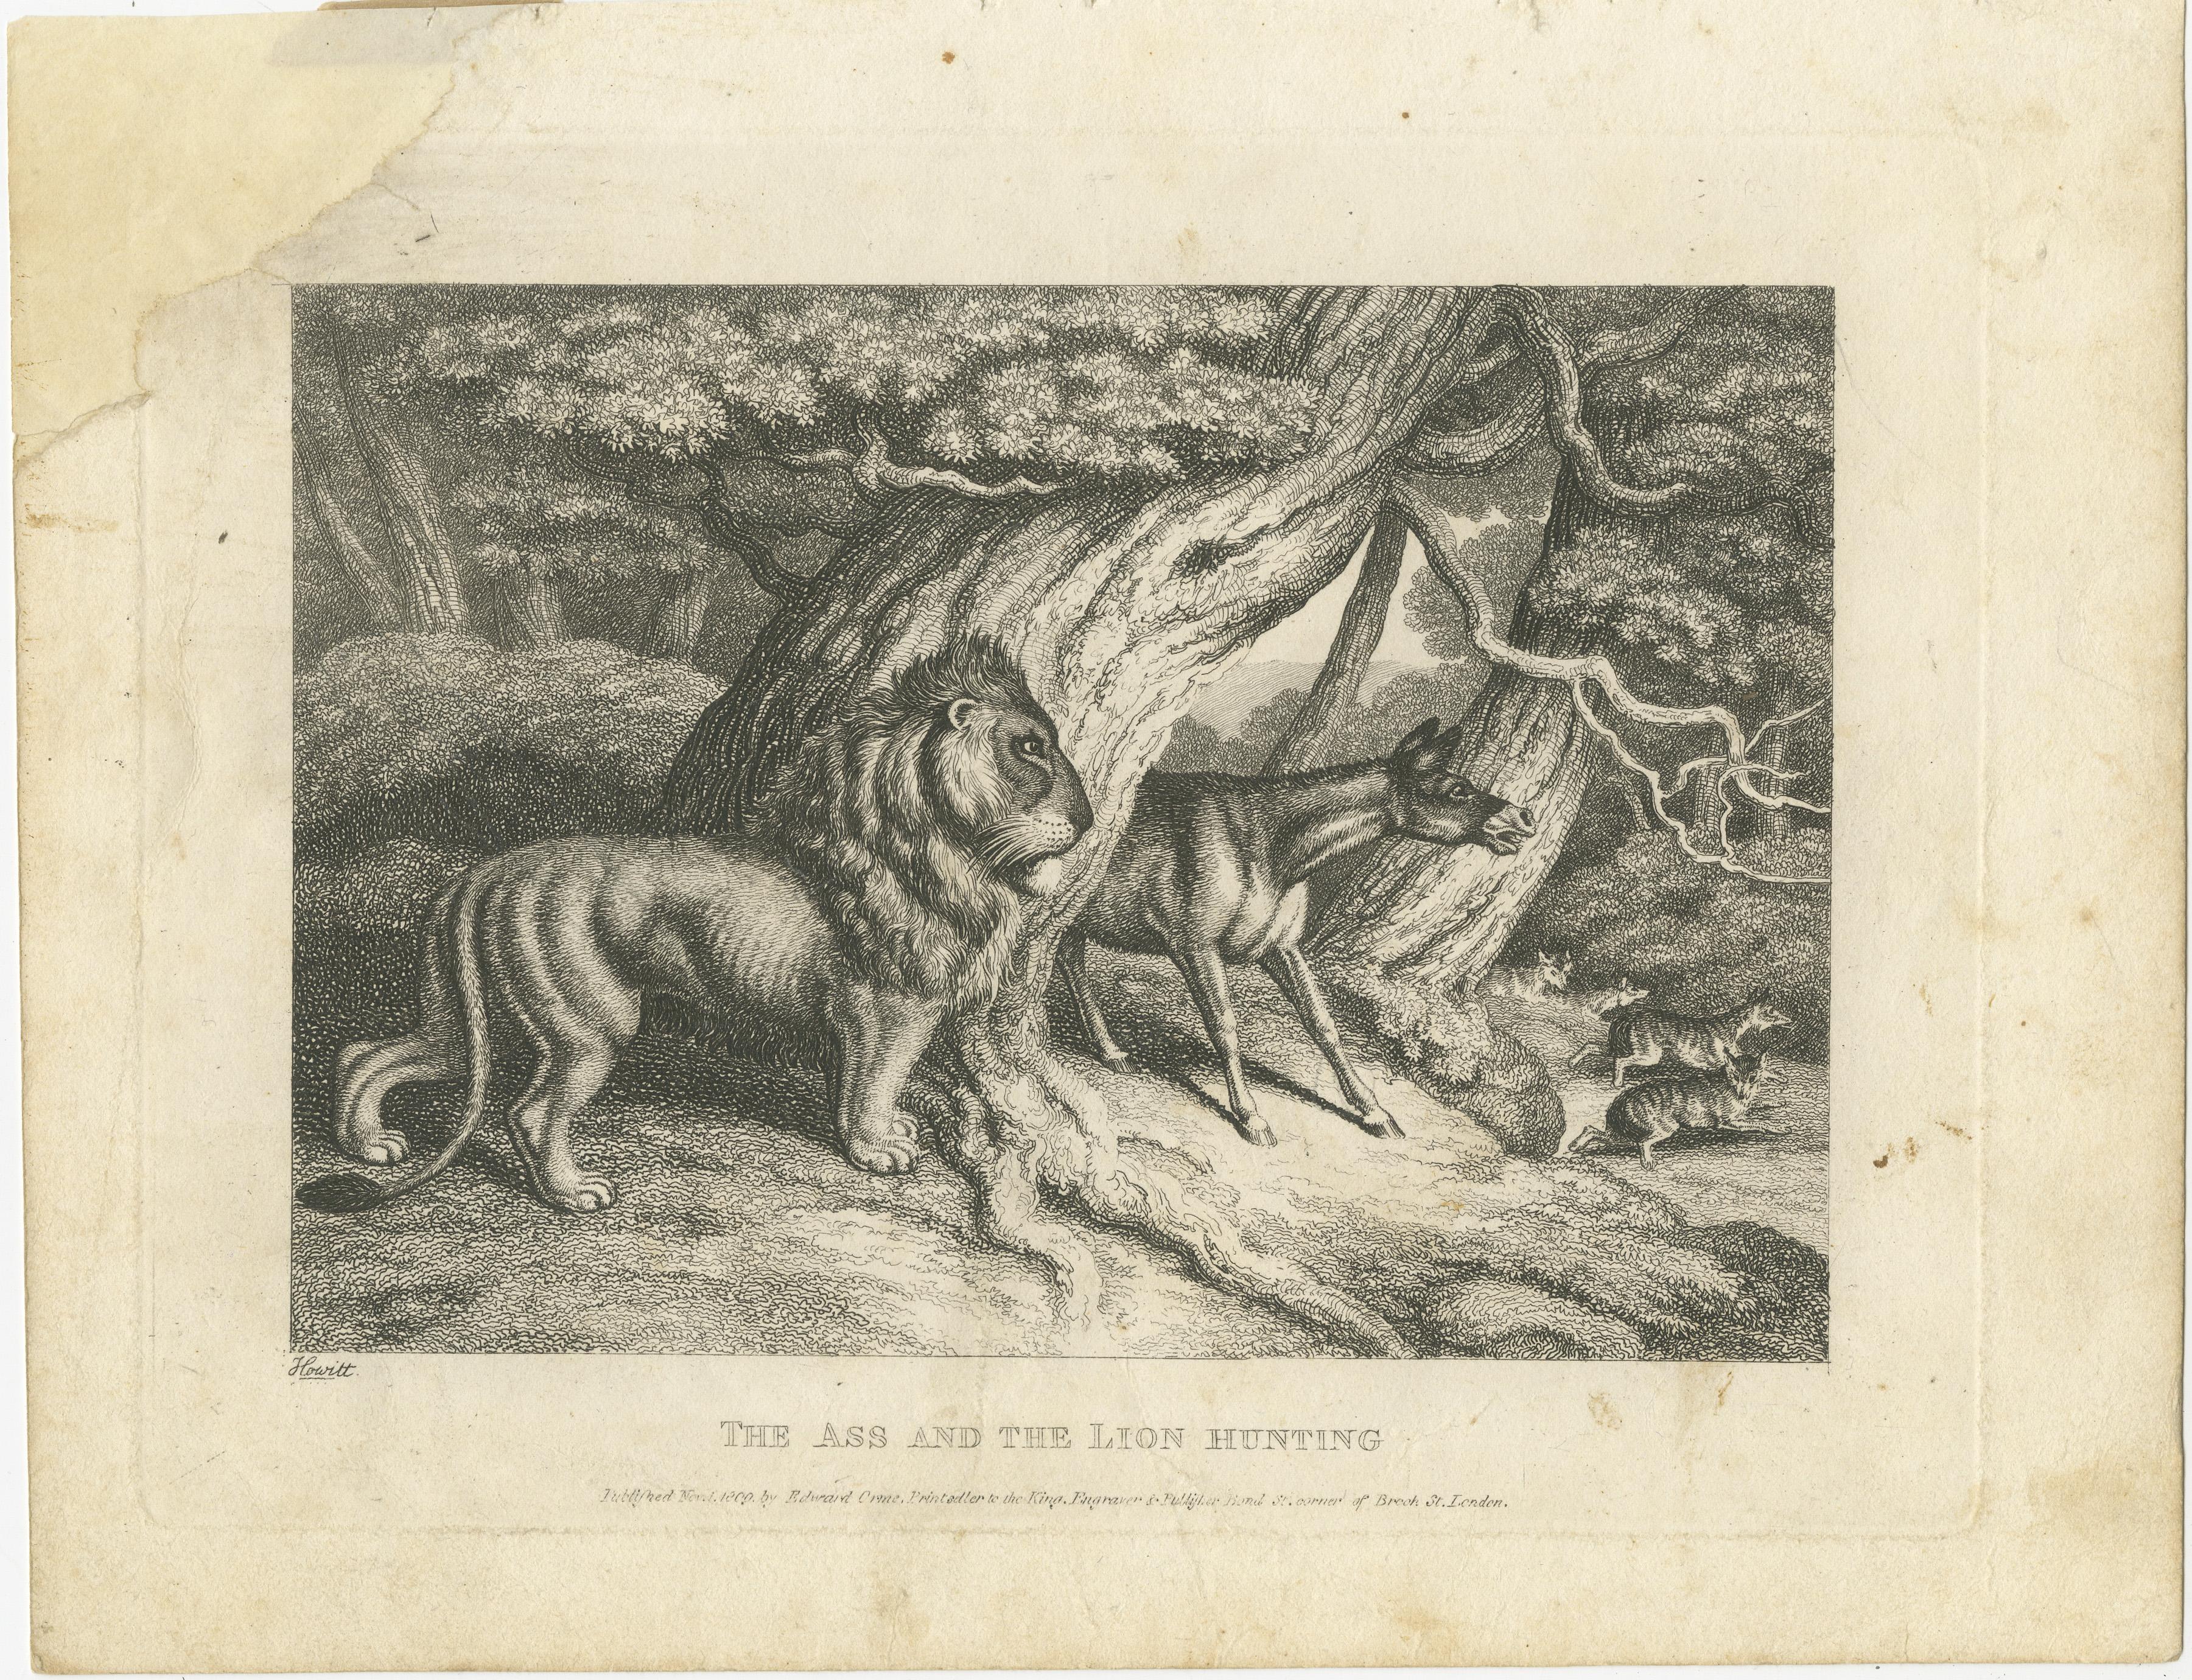 Antique print titled 'The Ass and the Lion hunting'. A donkey brays loudly at wolves while hunting with a male lion. This print originates from a series depicting fables by Samuel Howitt. Samuel Howitt was an English painter, illustrator and etcher